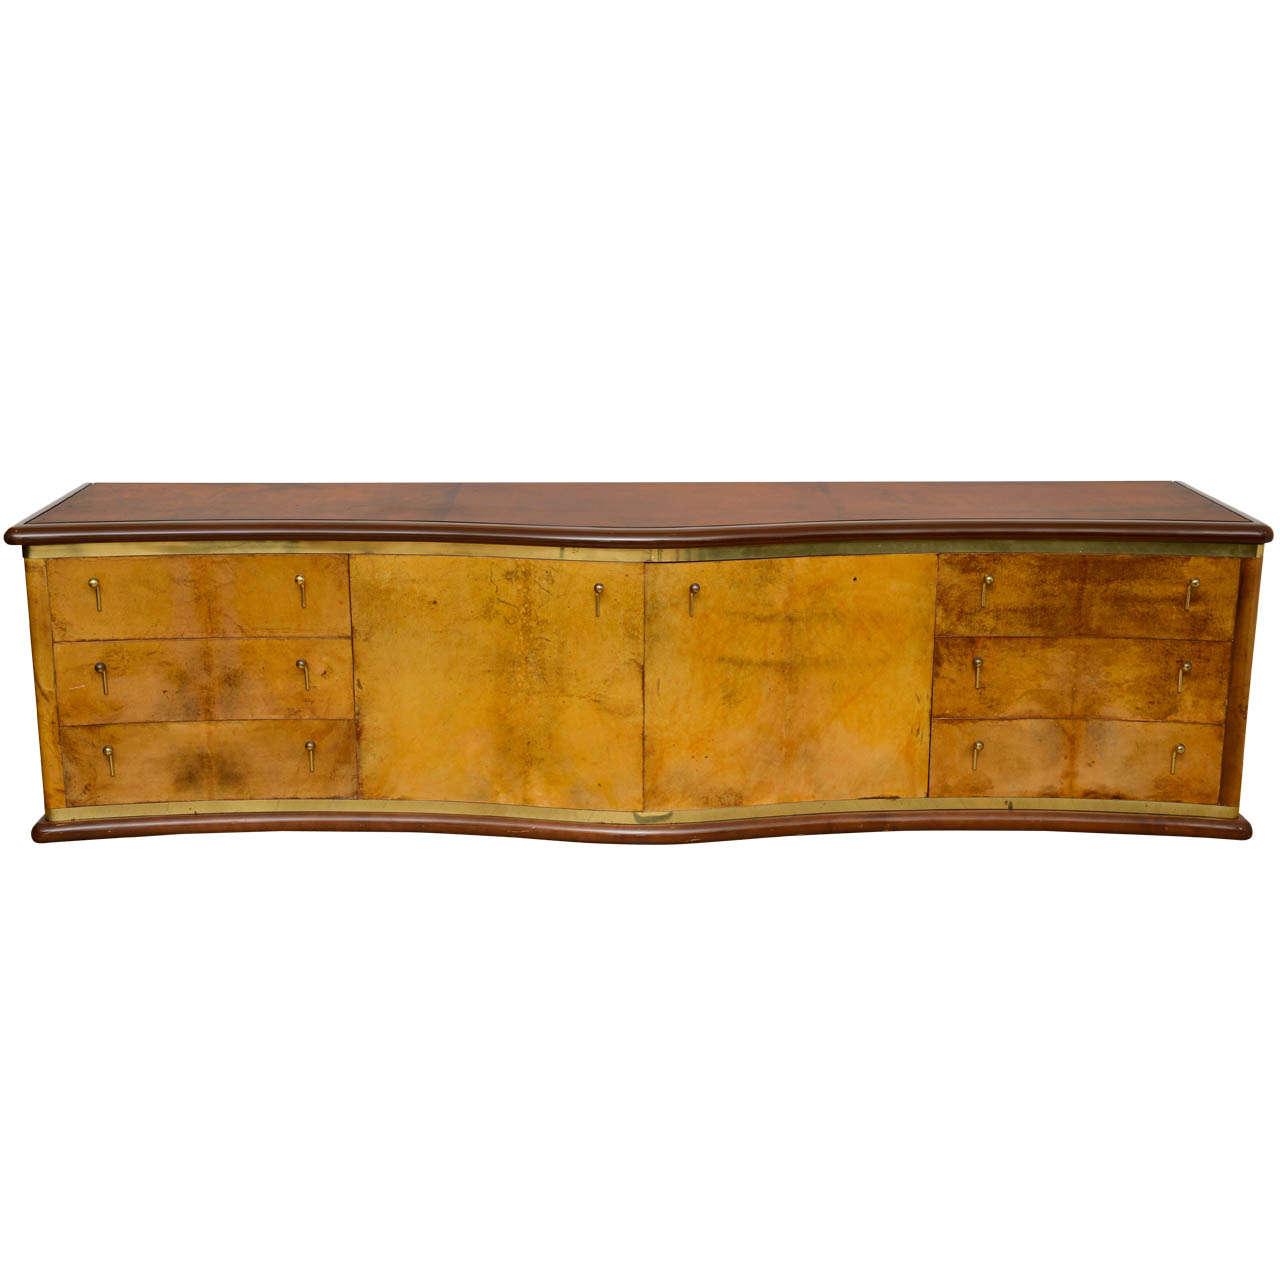 Rare Goatskin Chest of Drawers by Luciano Frigerio